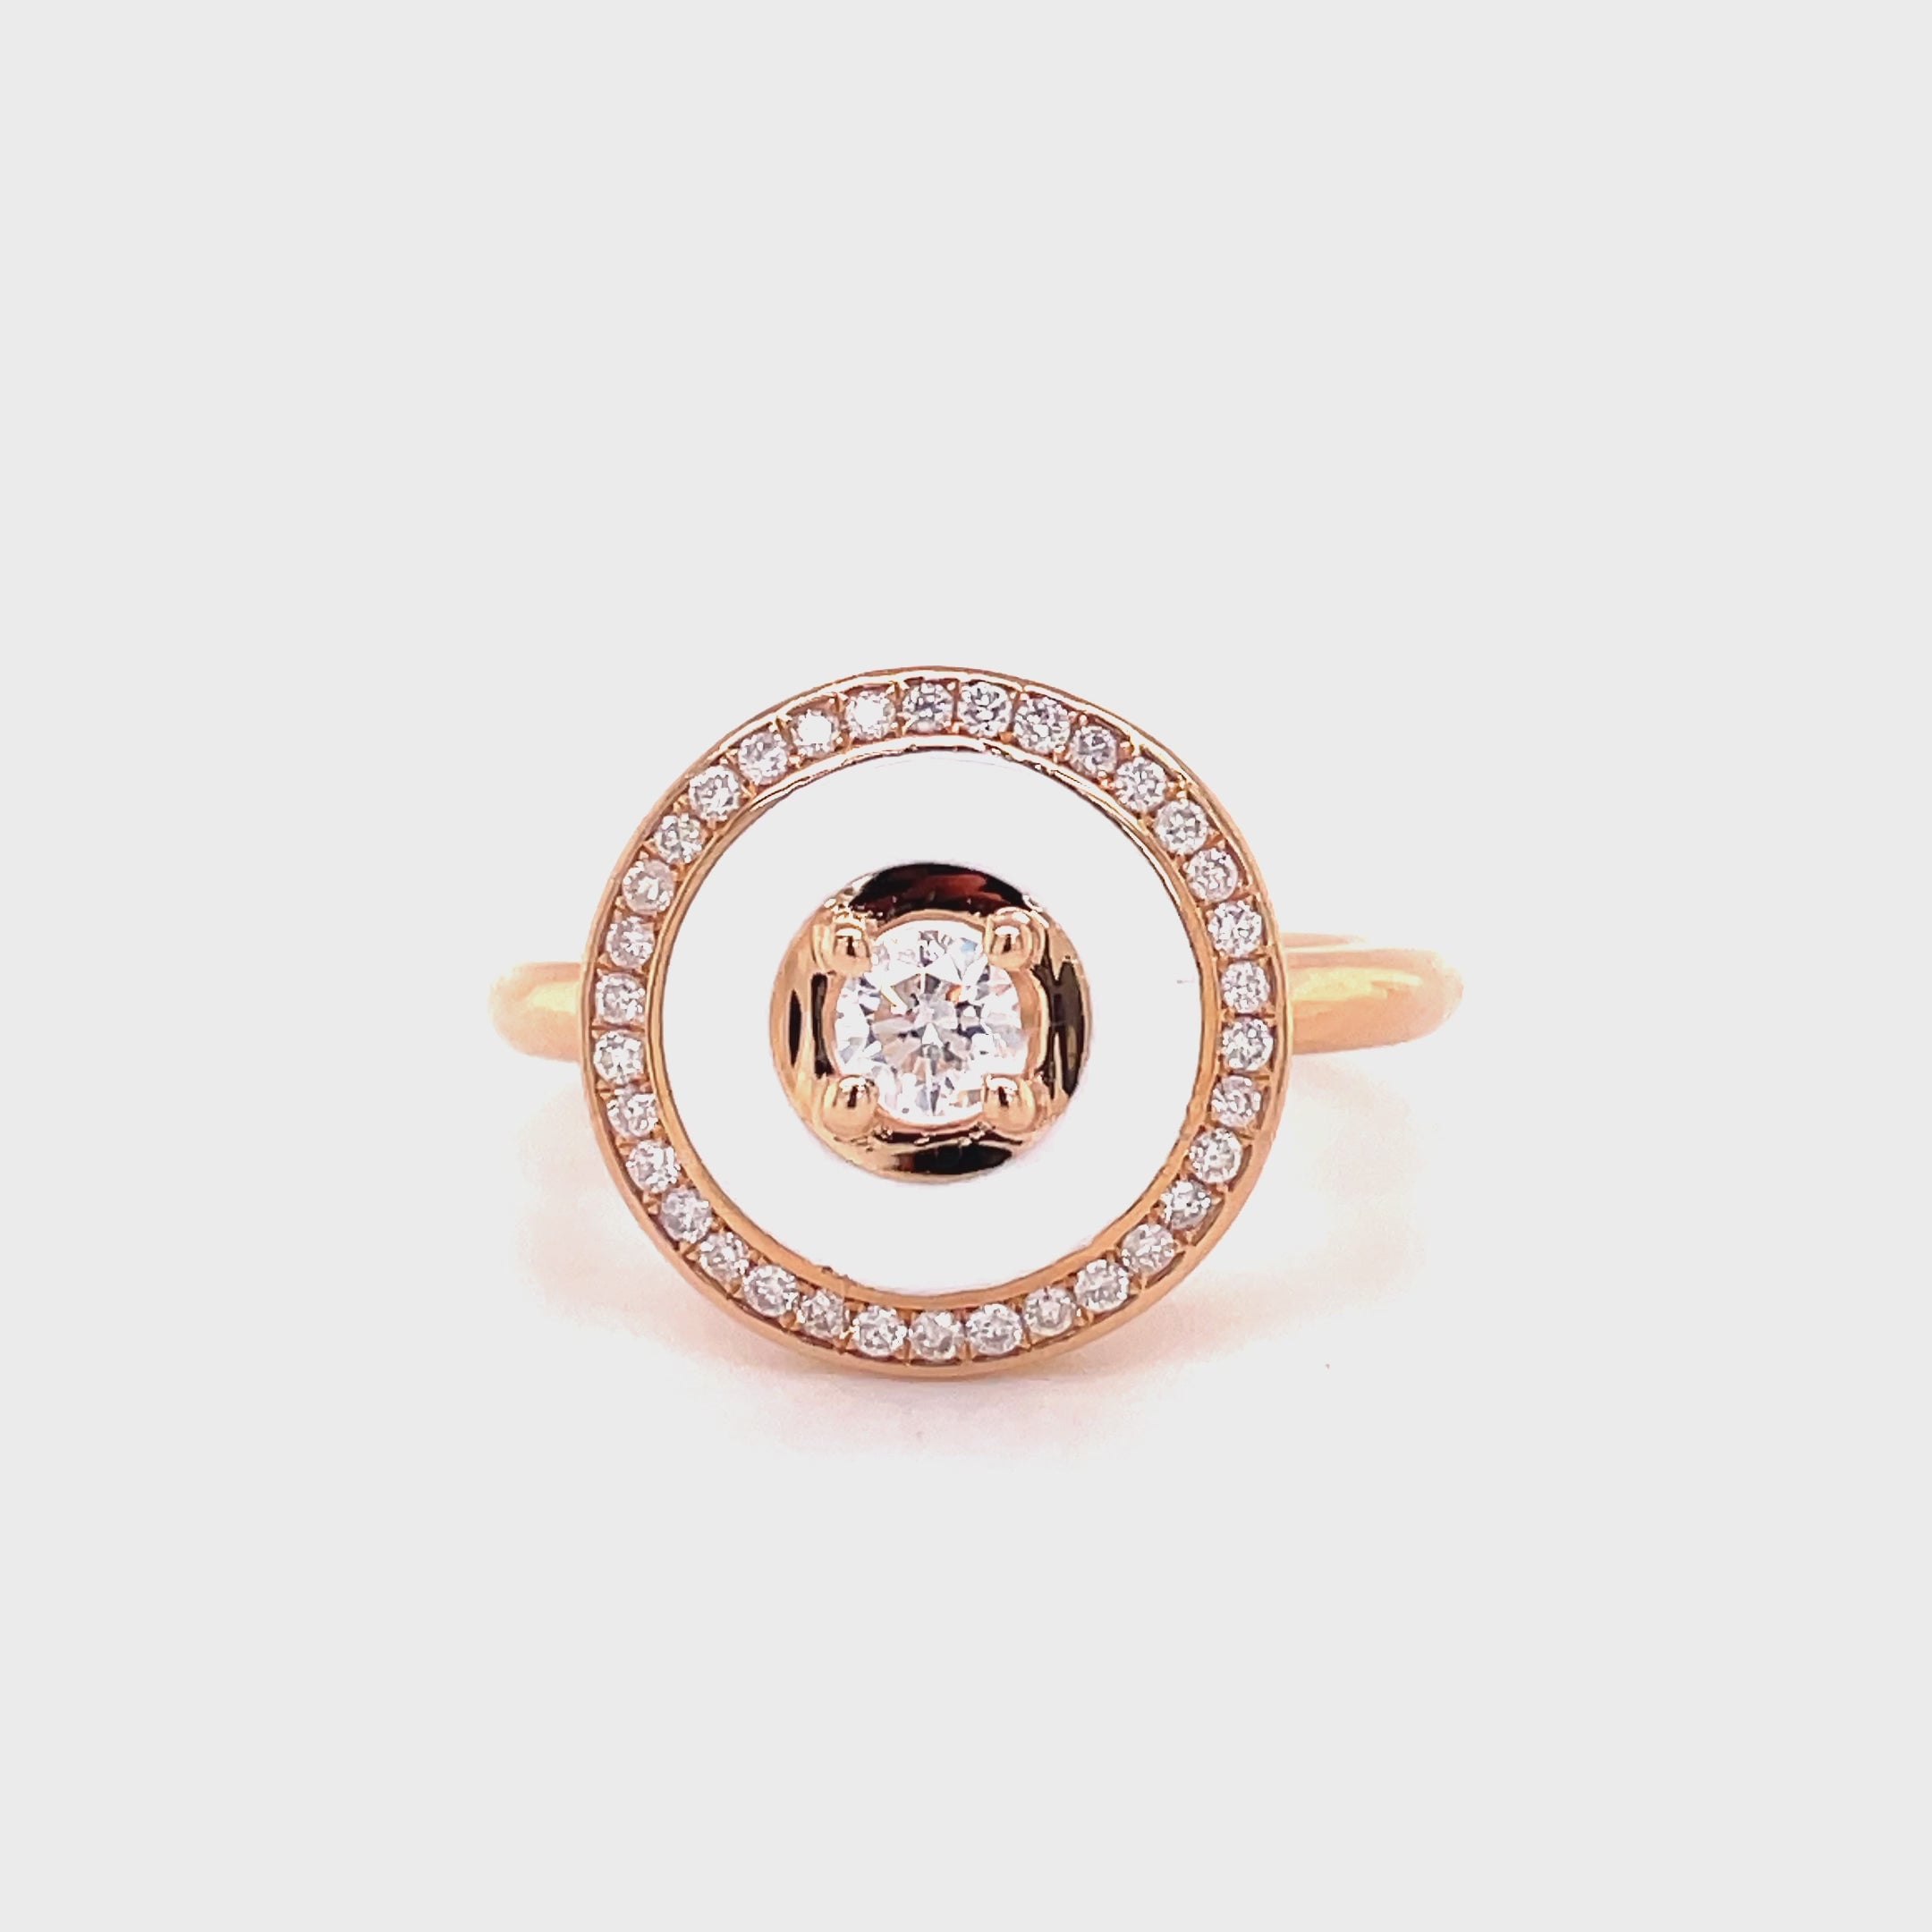 This exquisite ring is made of 14k rose gold with round diamonds totaling 0.40cts. It features a diamond bezel with a round diamond in the center and an elegant white enamel background. Perfect for any occasion, this ring is a beautiful way to show someone special that you care.